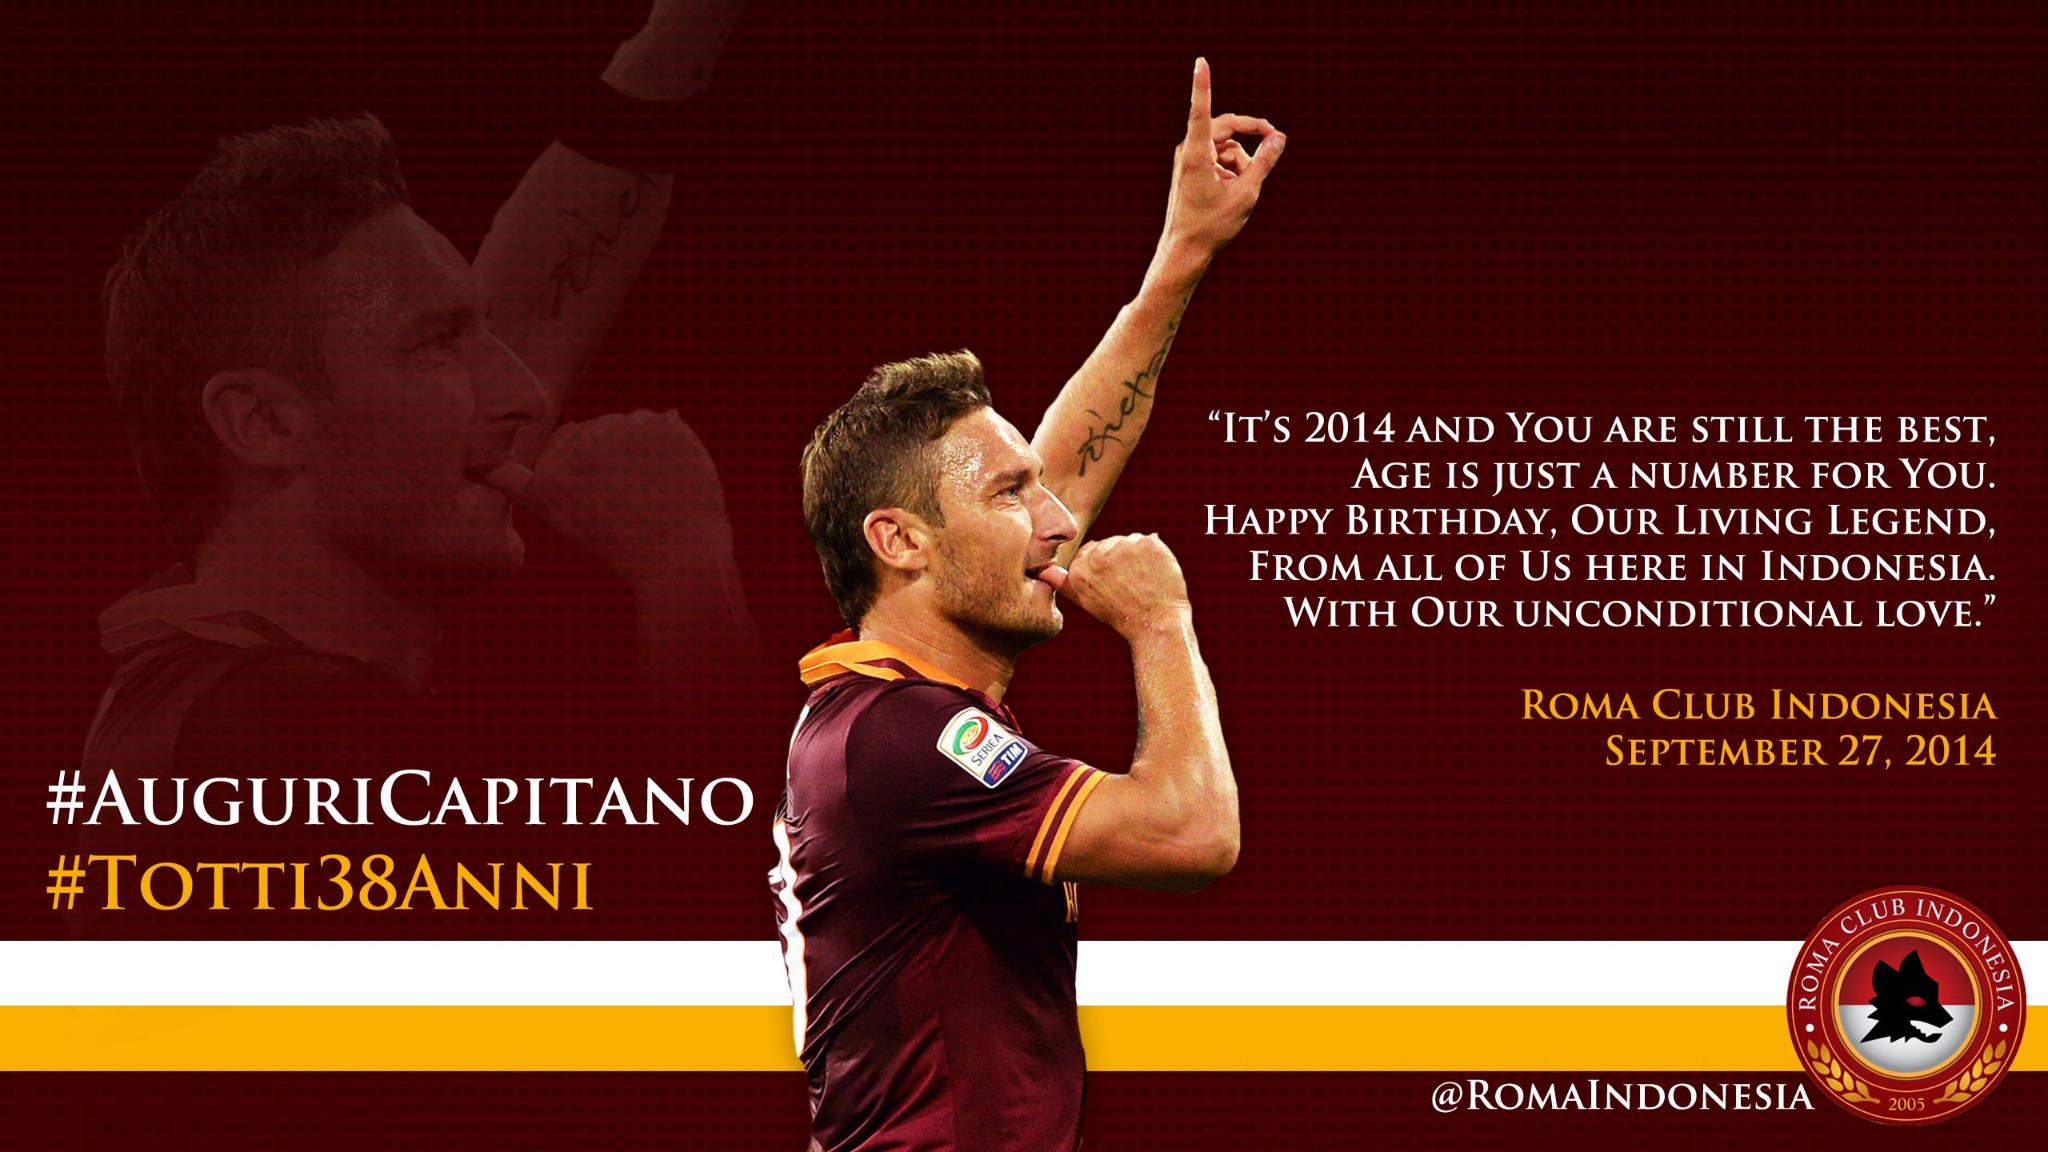 Happy birthday, Francesco Totti from all of Us here In Indonesia. God richly bless You!  